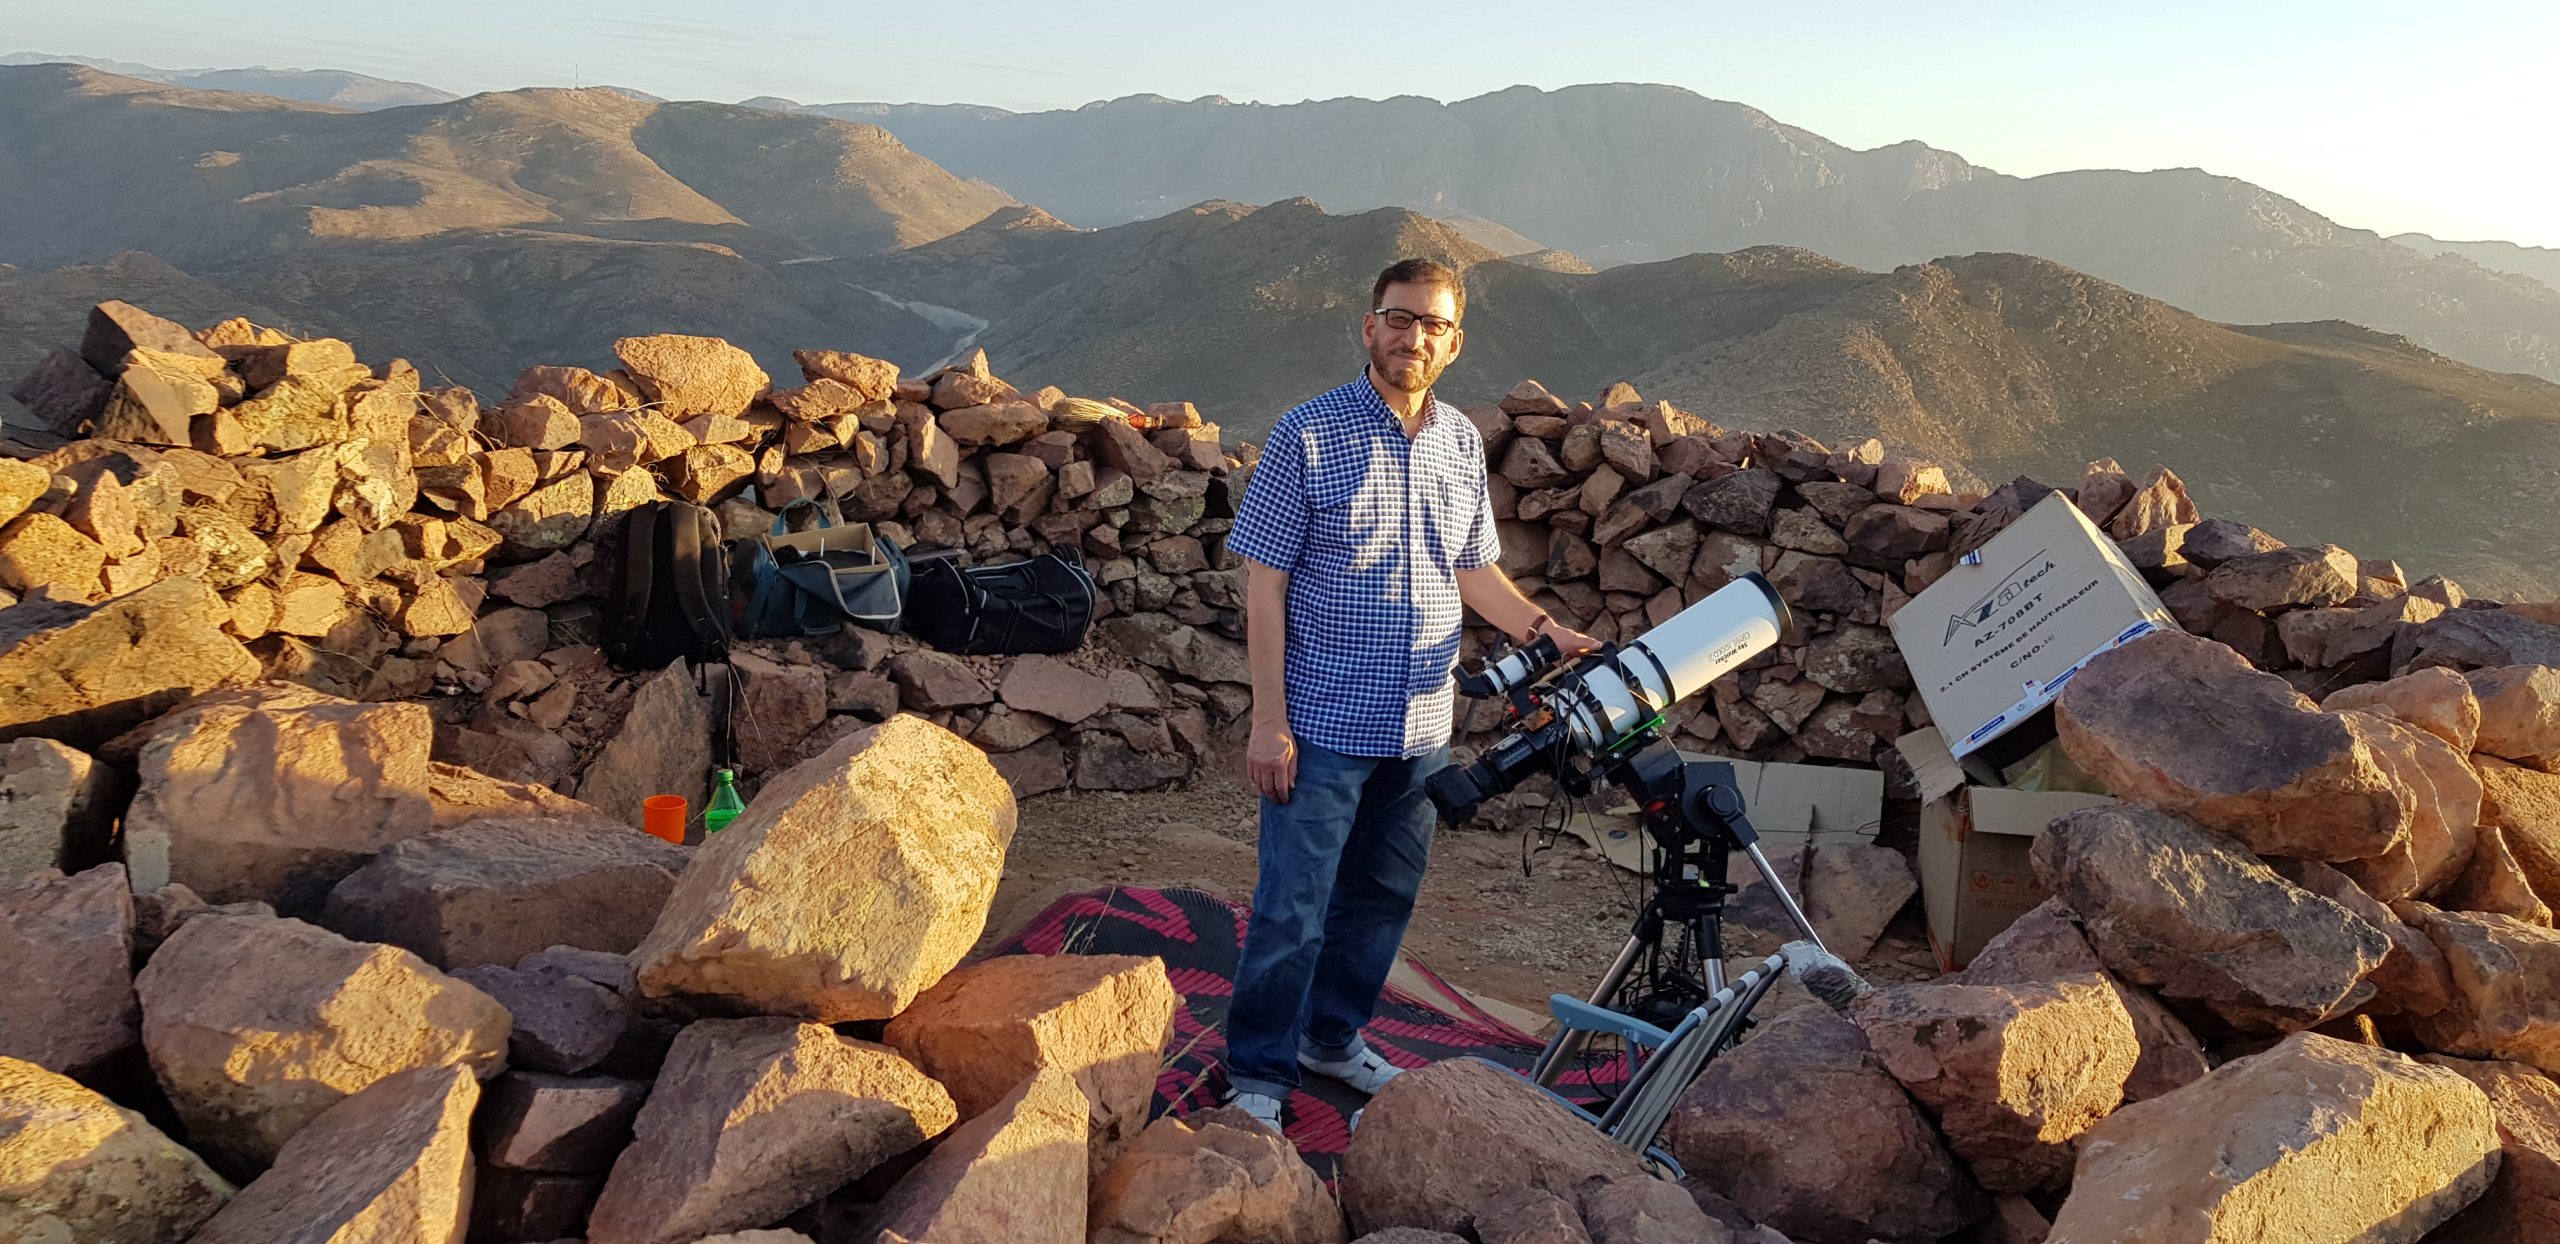 Mazin with his refractor set up amongst the rocks of the summit, illuminated by a low sun, with rugged mountains in the background